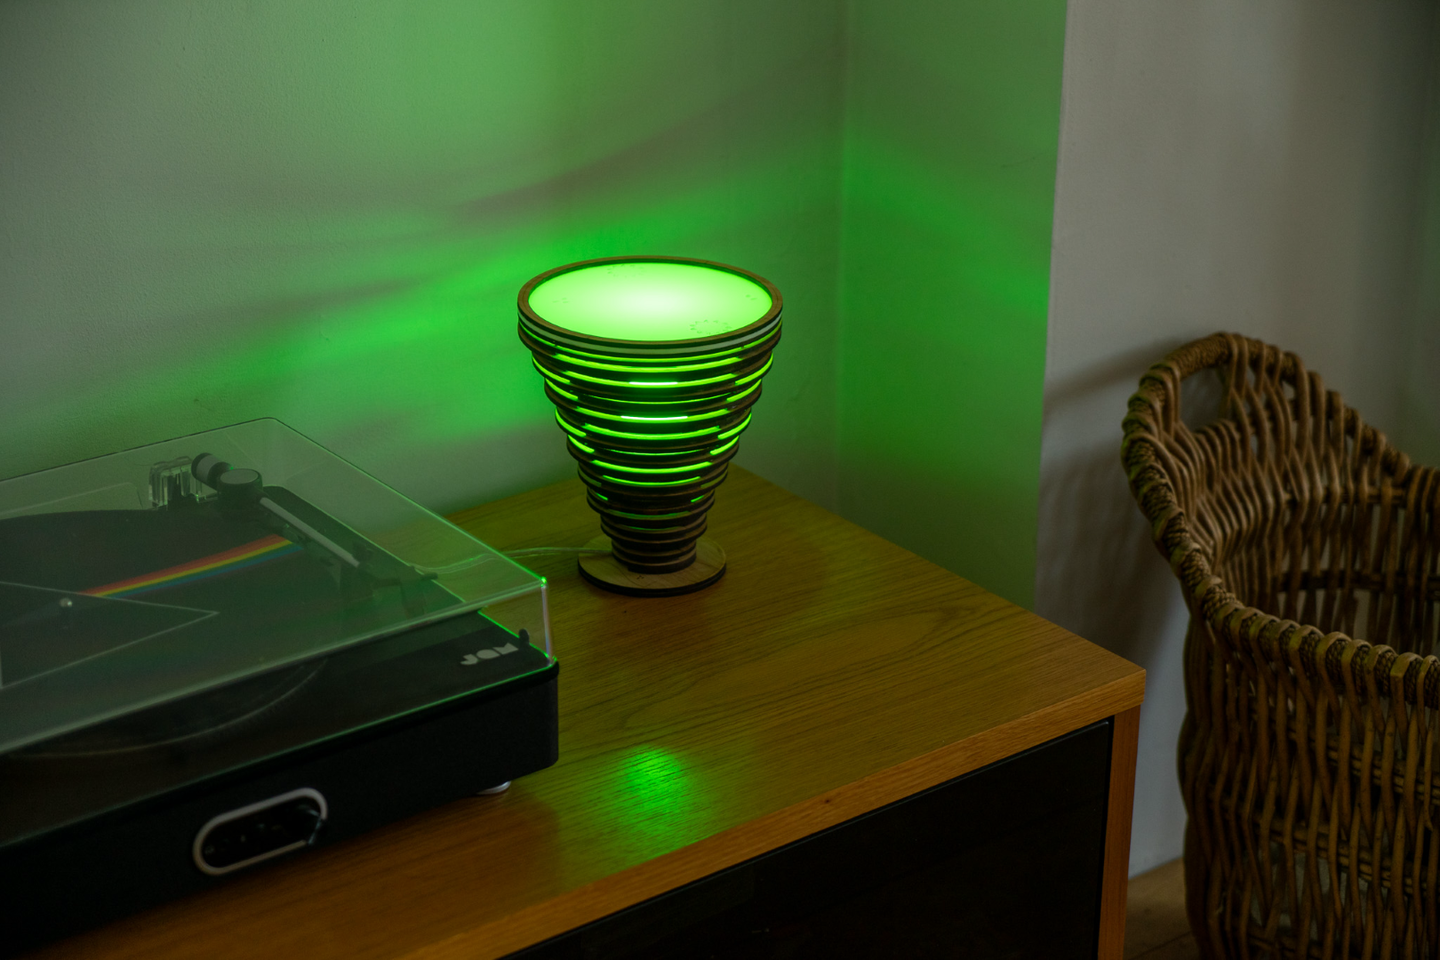 Image 1: Gardening Notification Received - a lamp showing a green light